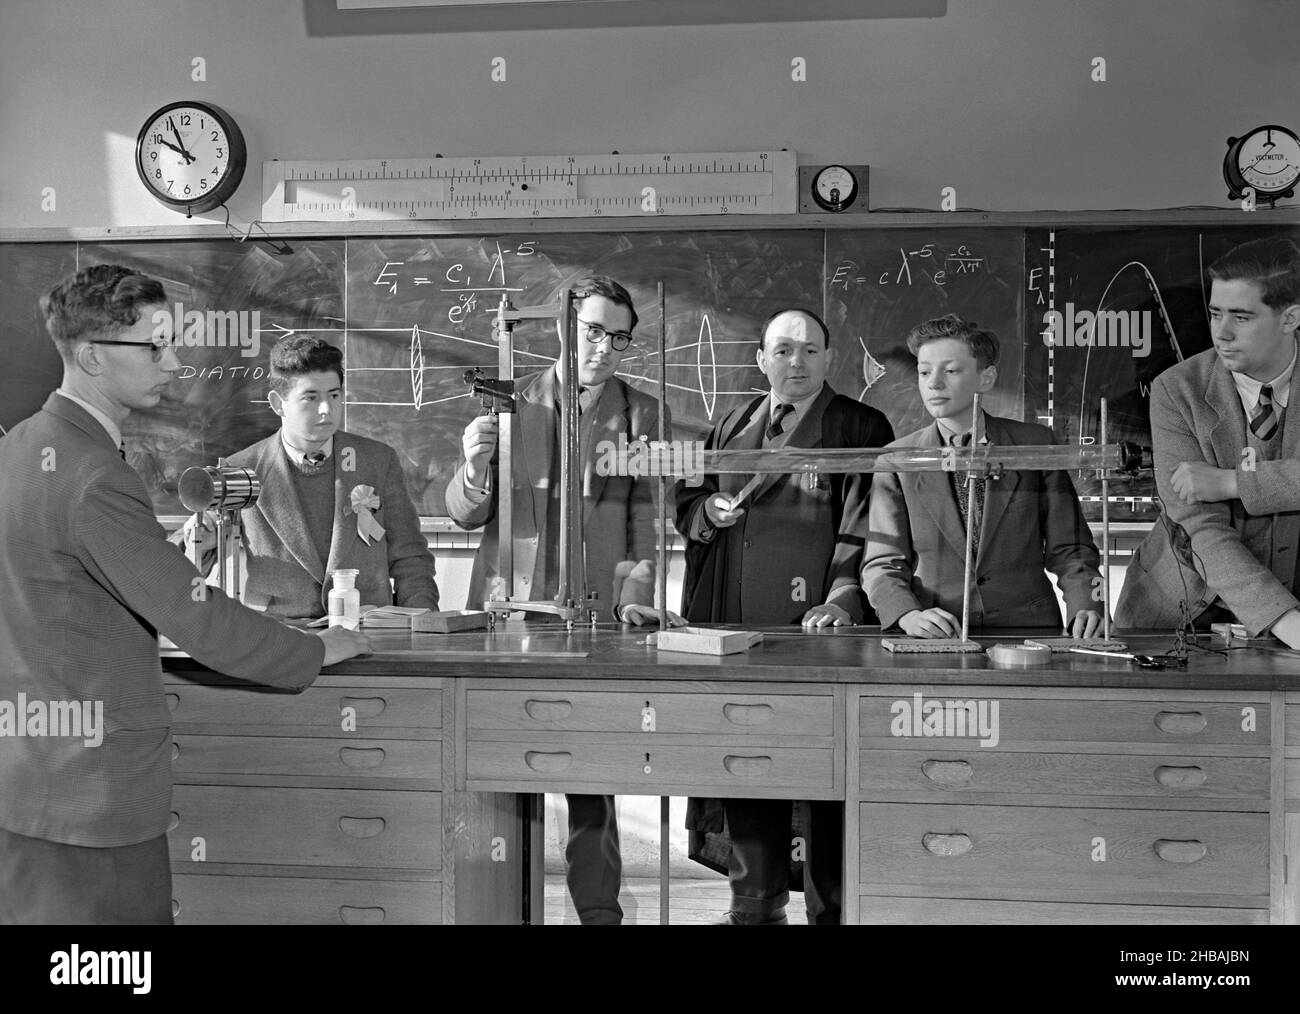 An experiment in the school science laboratory in Britain c.1960. The long tube the teacher and pupils are looking at is wired up – presumably this experiment is about current/light passing through a gaseous environment (the equations and drawings on the blackboard appear to be on radiation and the behaviour of light rays). Note the lack of protective eyewear at that time. This is taken from an old black and white negative – a vintage 1950s/60s photograph. Stock Photo